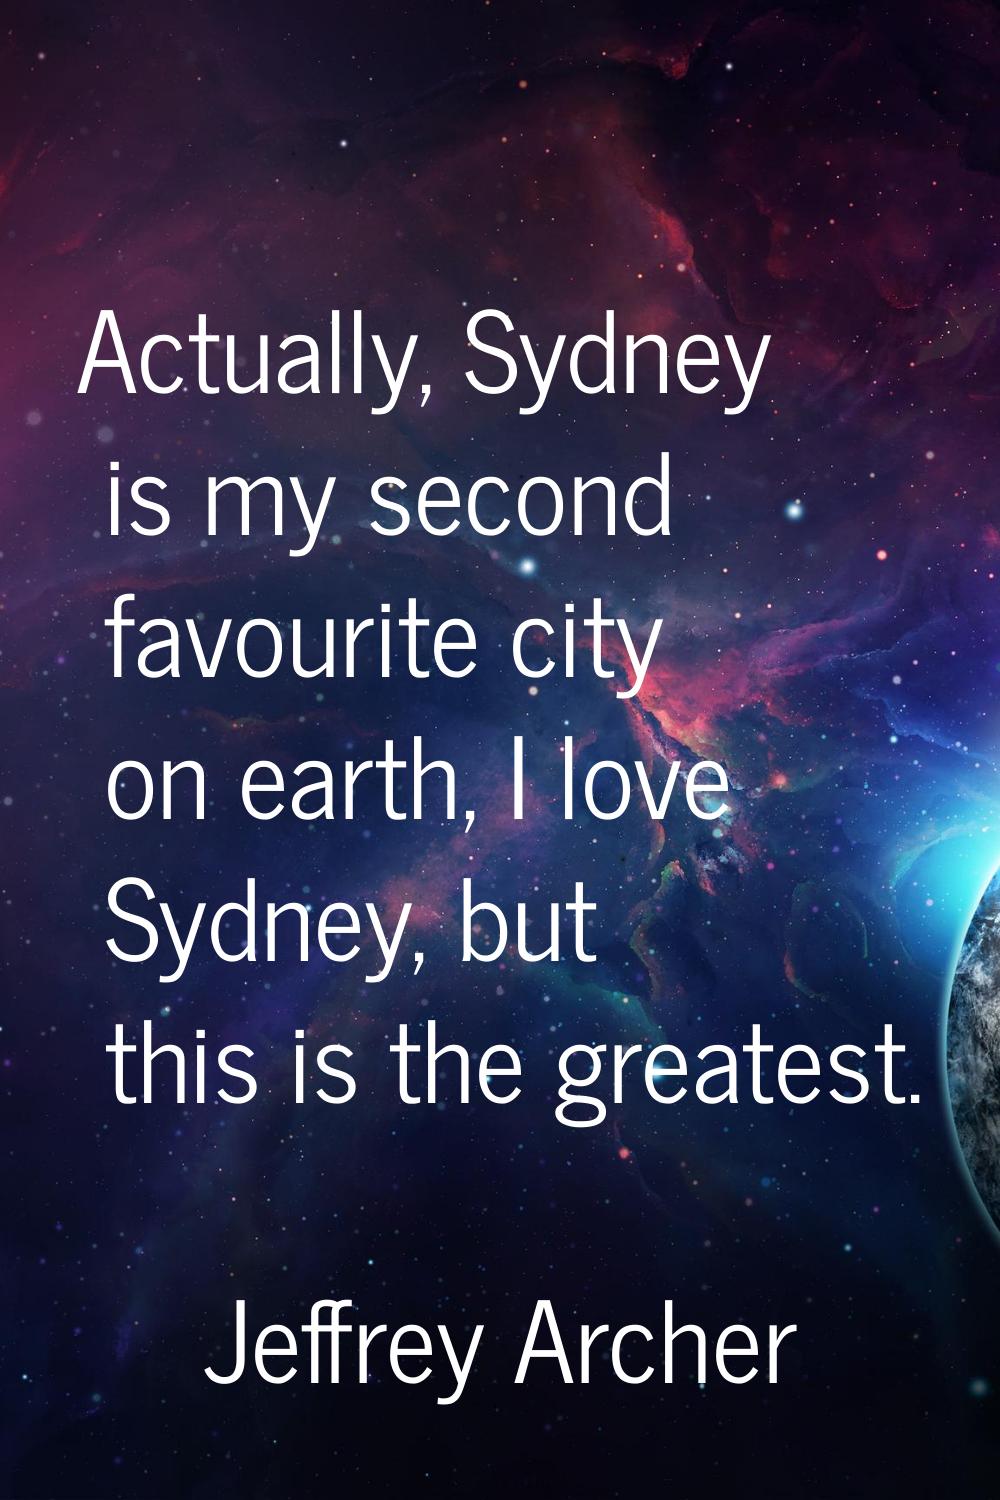 Actually, Sydney is my second favourite city on earth, I love Sydney, but this is the greatest.